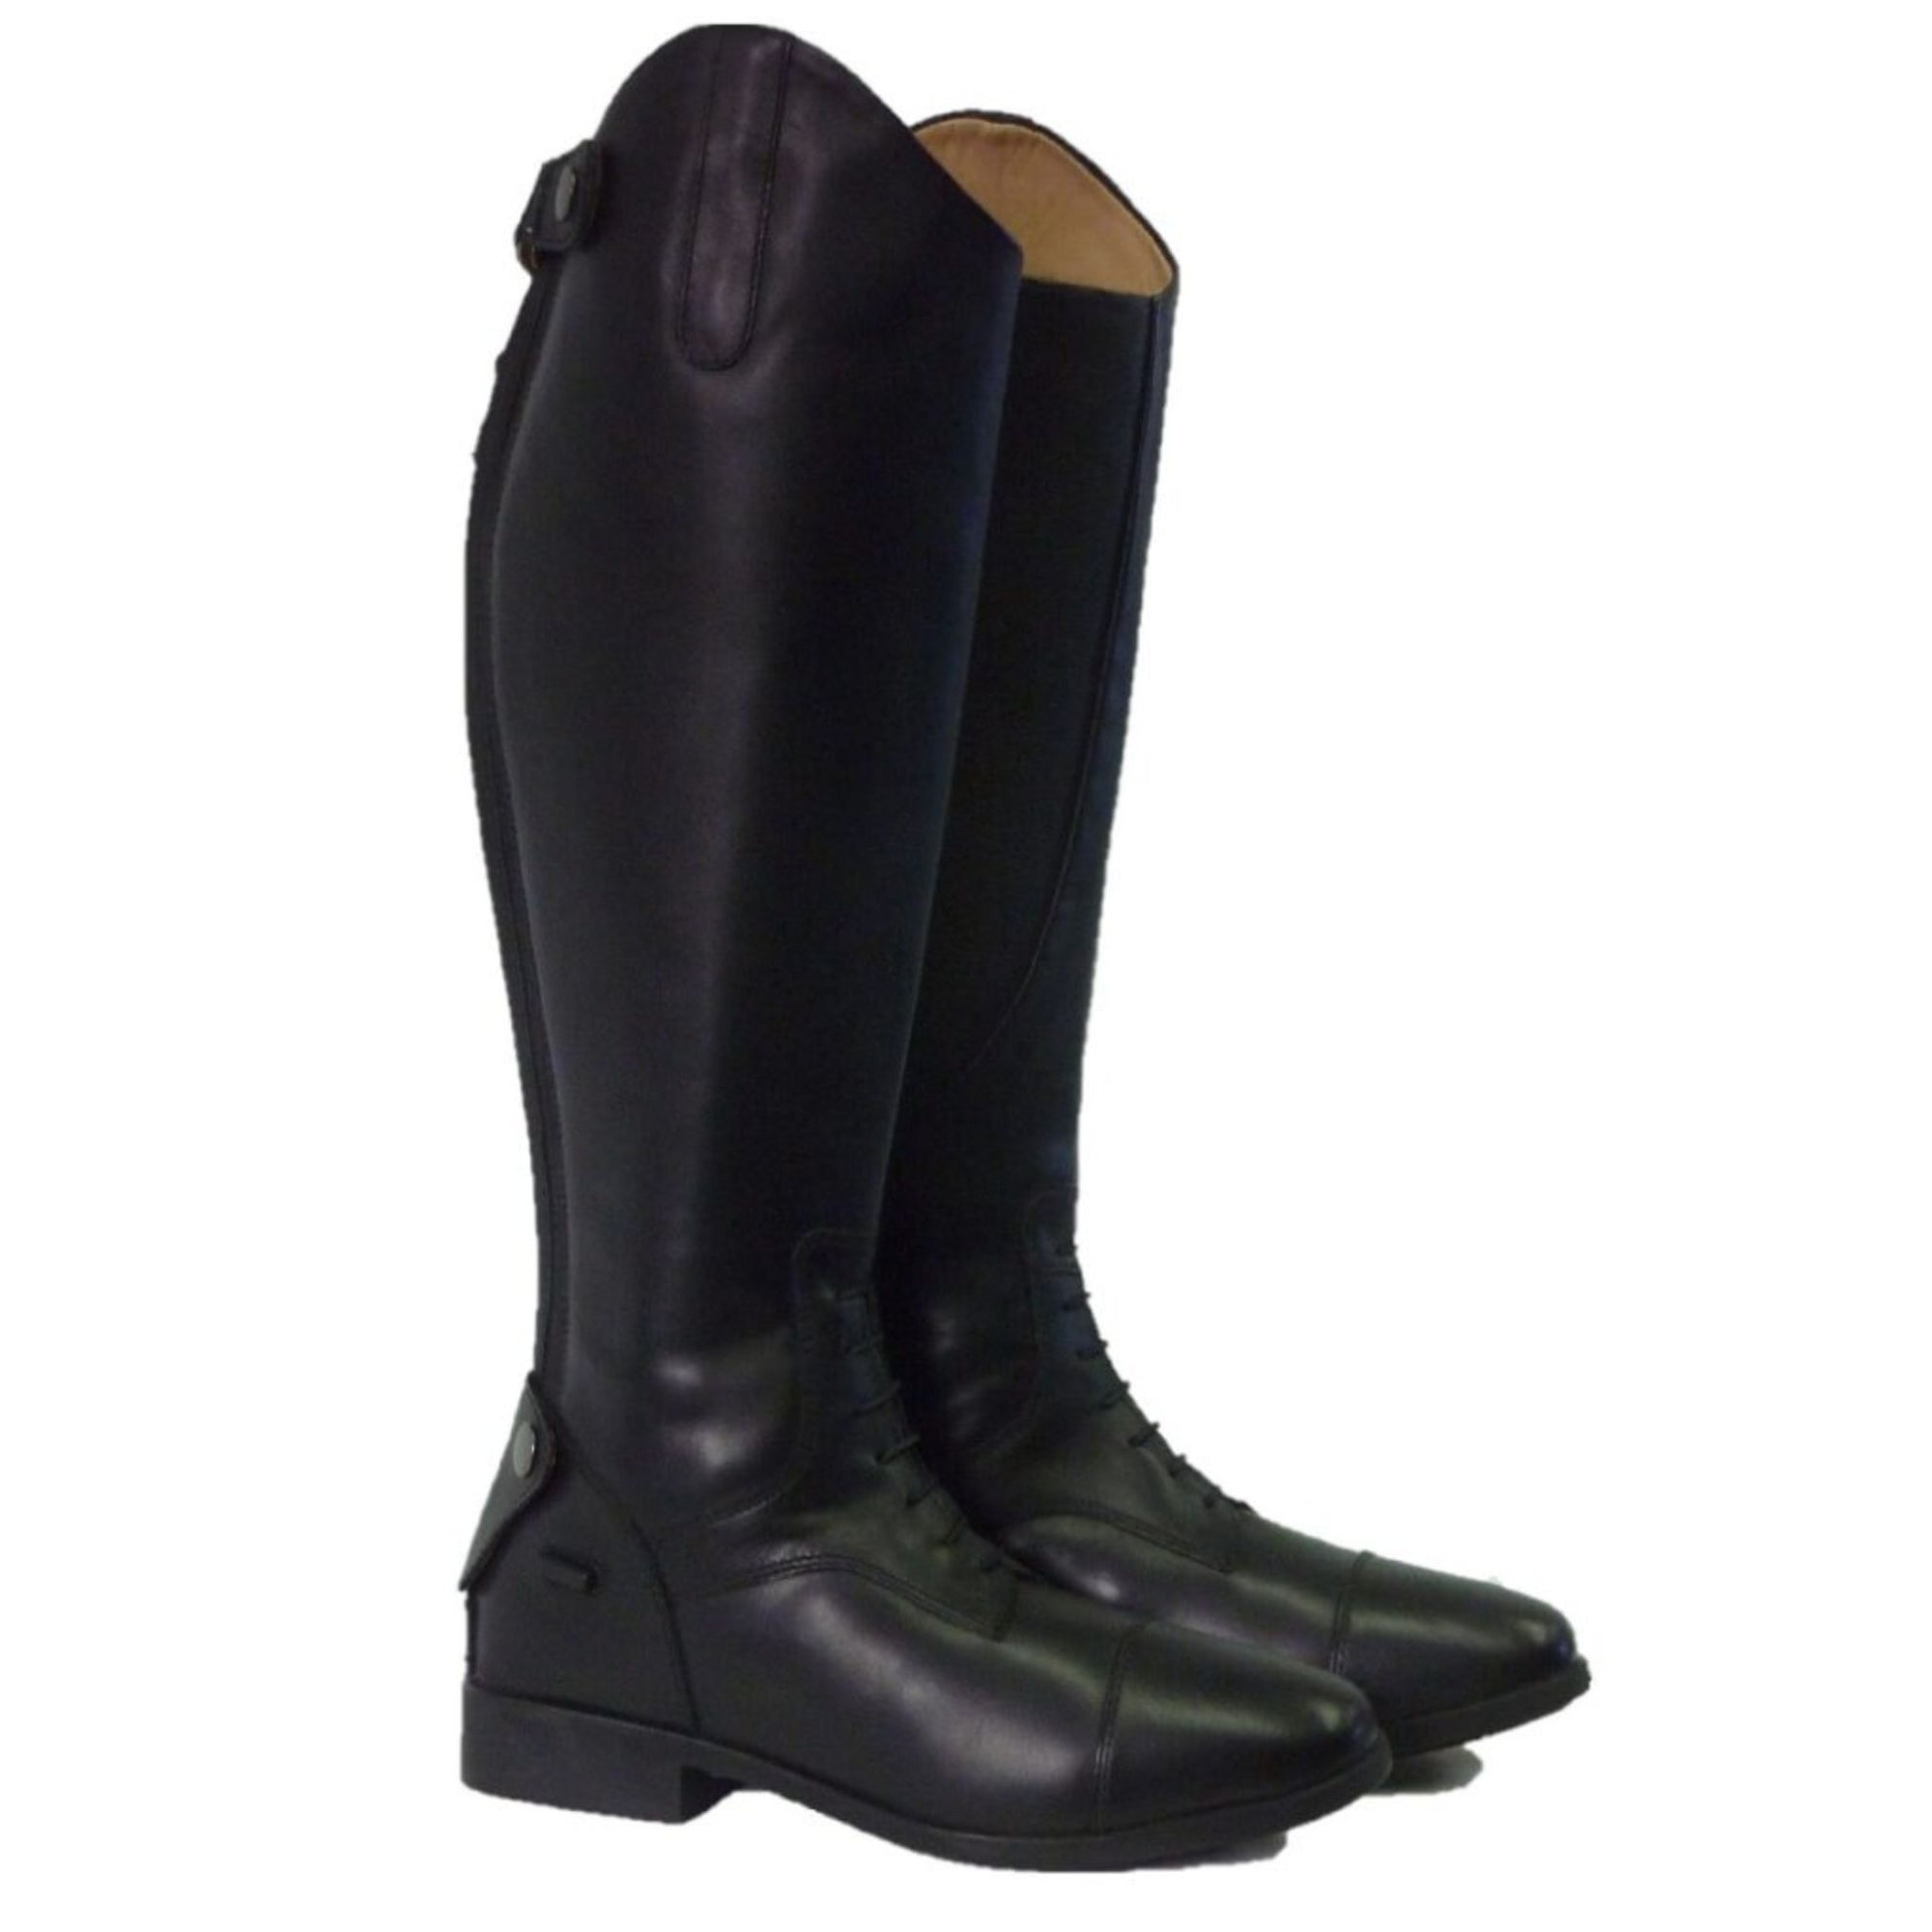 Pair of black leather tall boots with elastic laces on front.